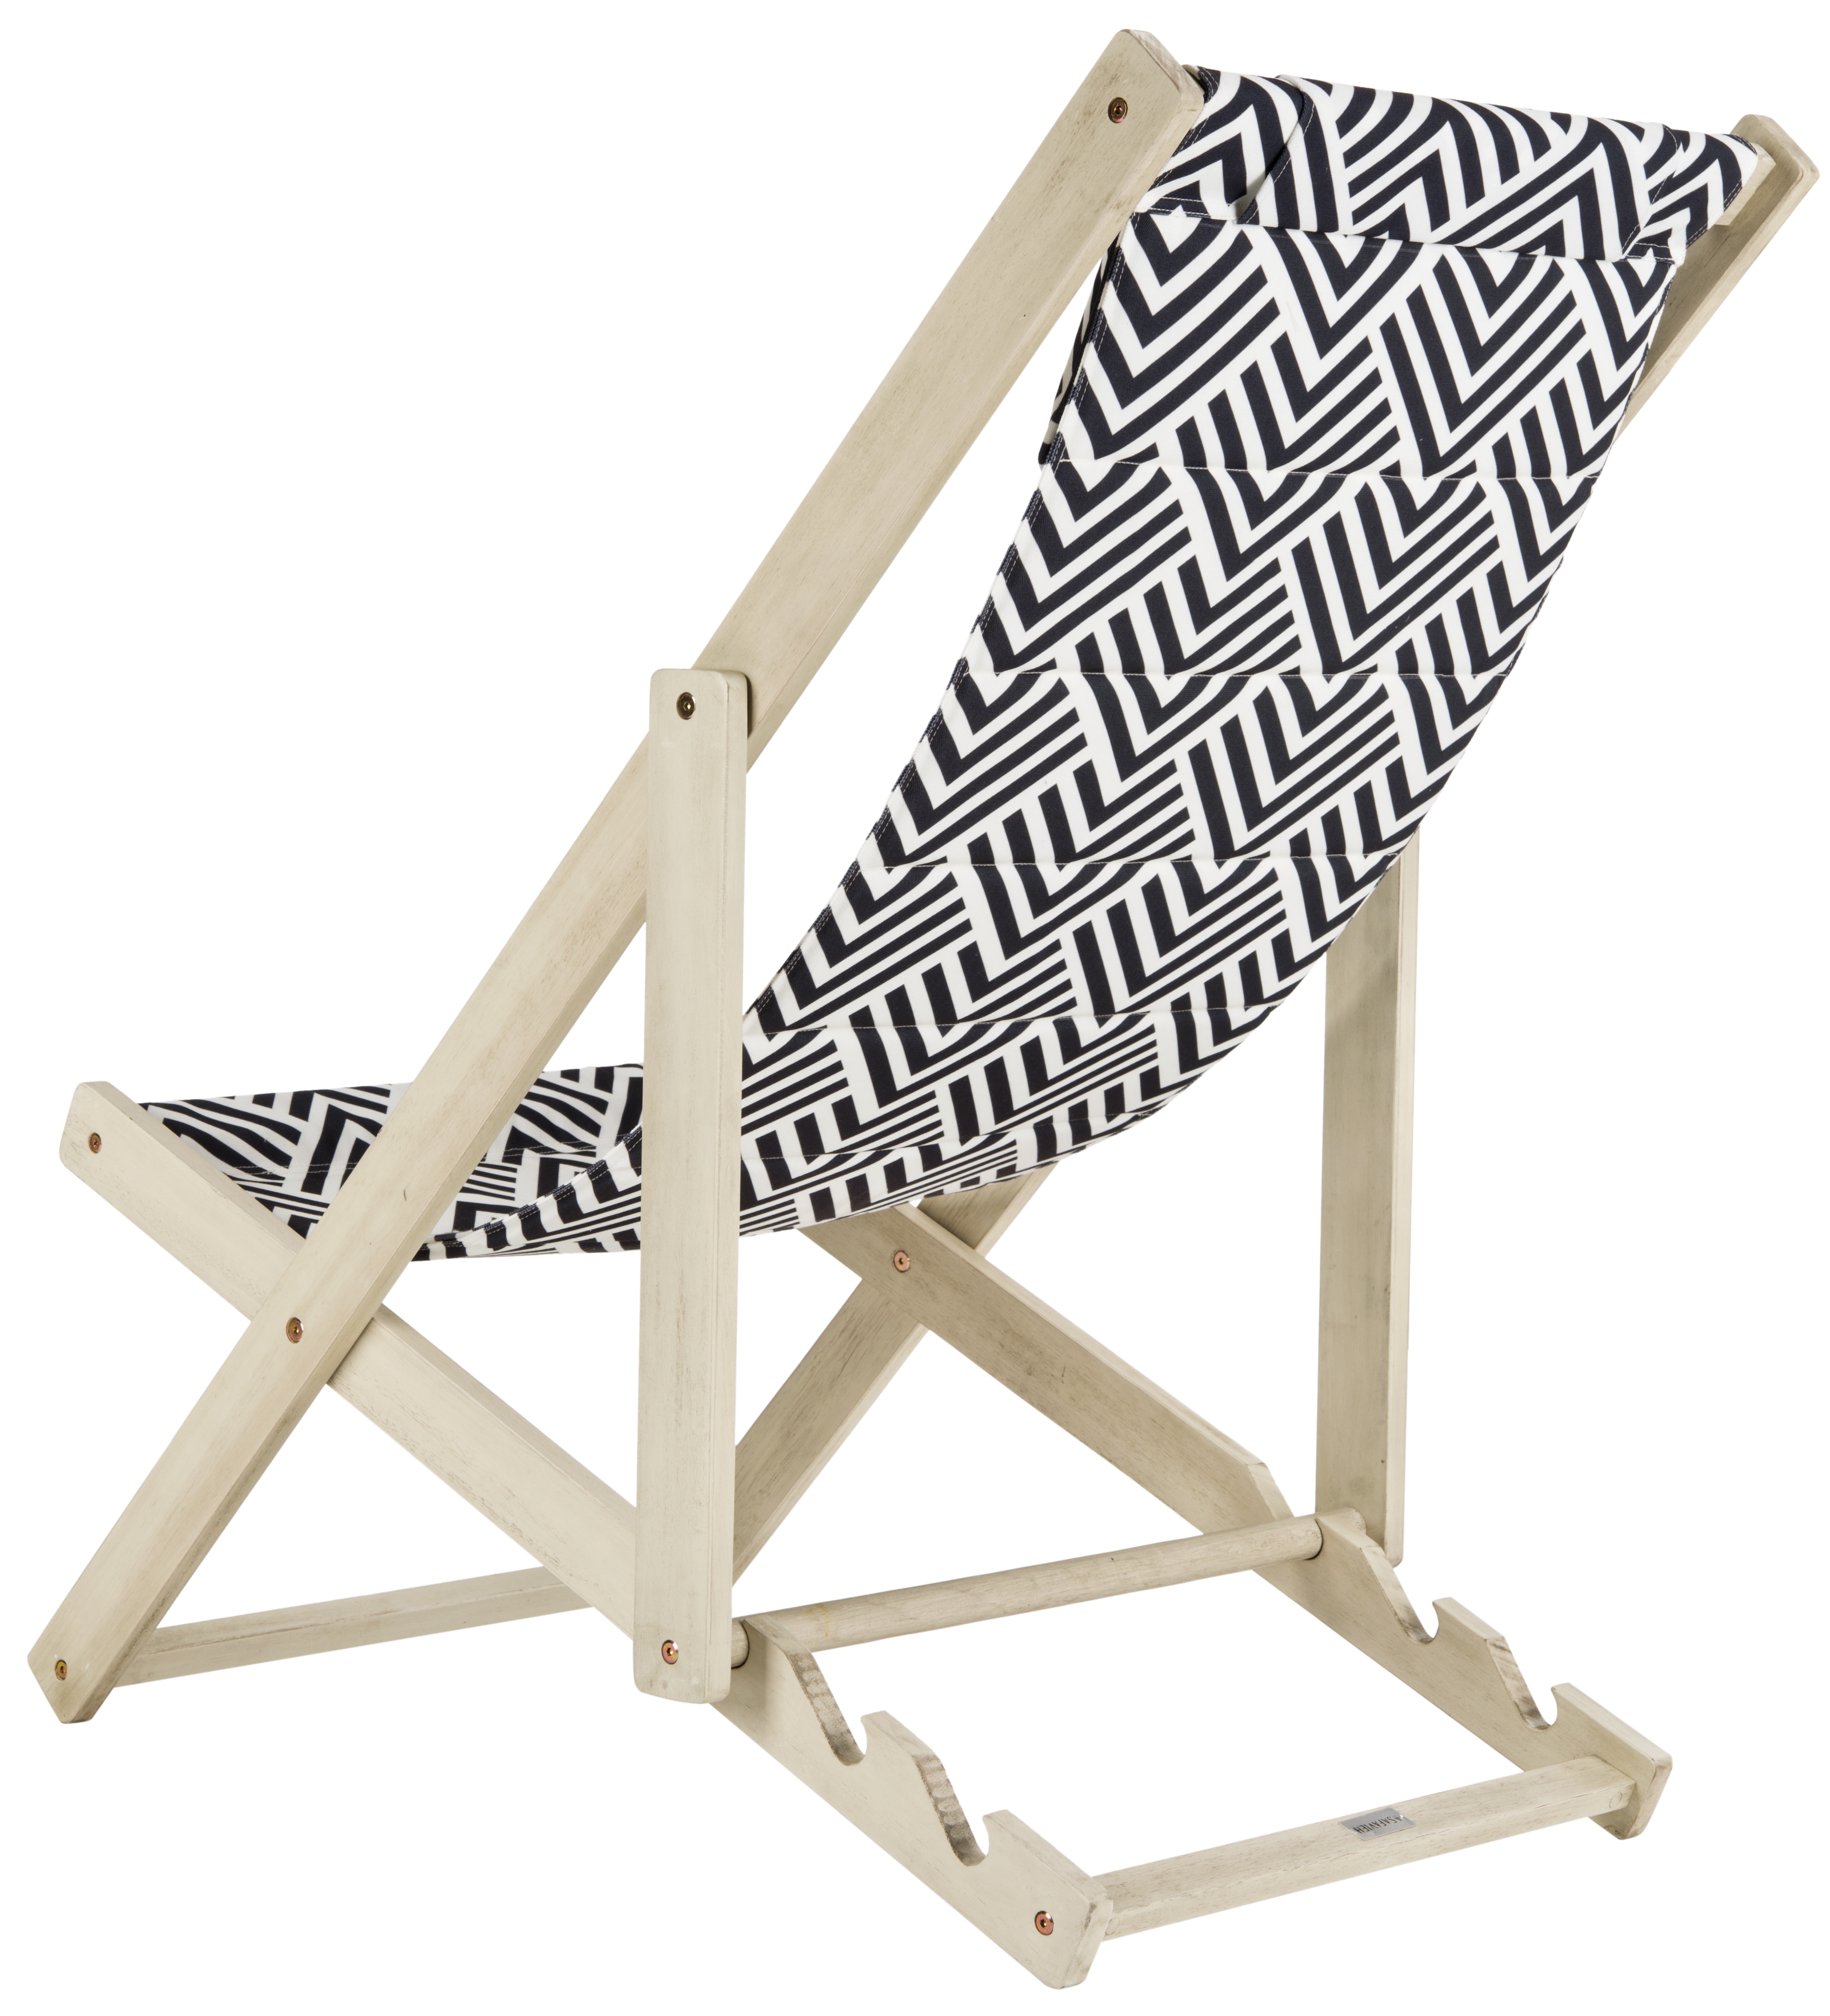 Rive Foldable Sling Chair - White Wash/Navy - Arlo Home - Image 3